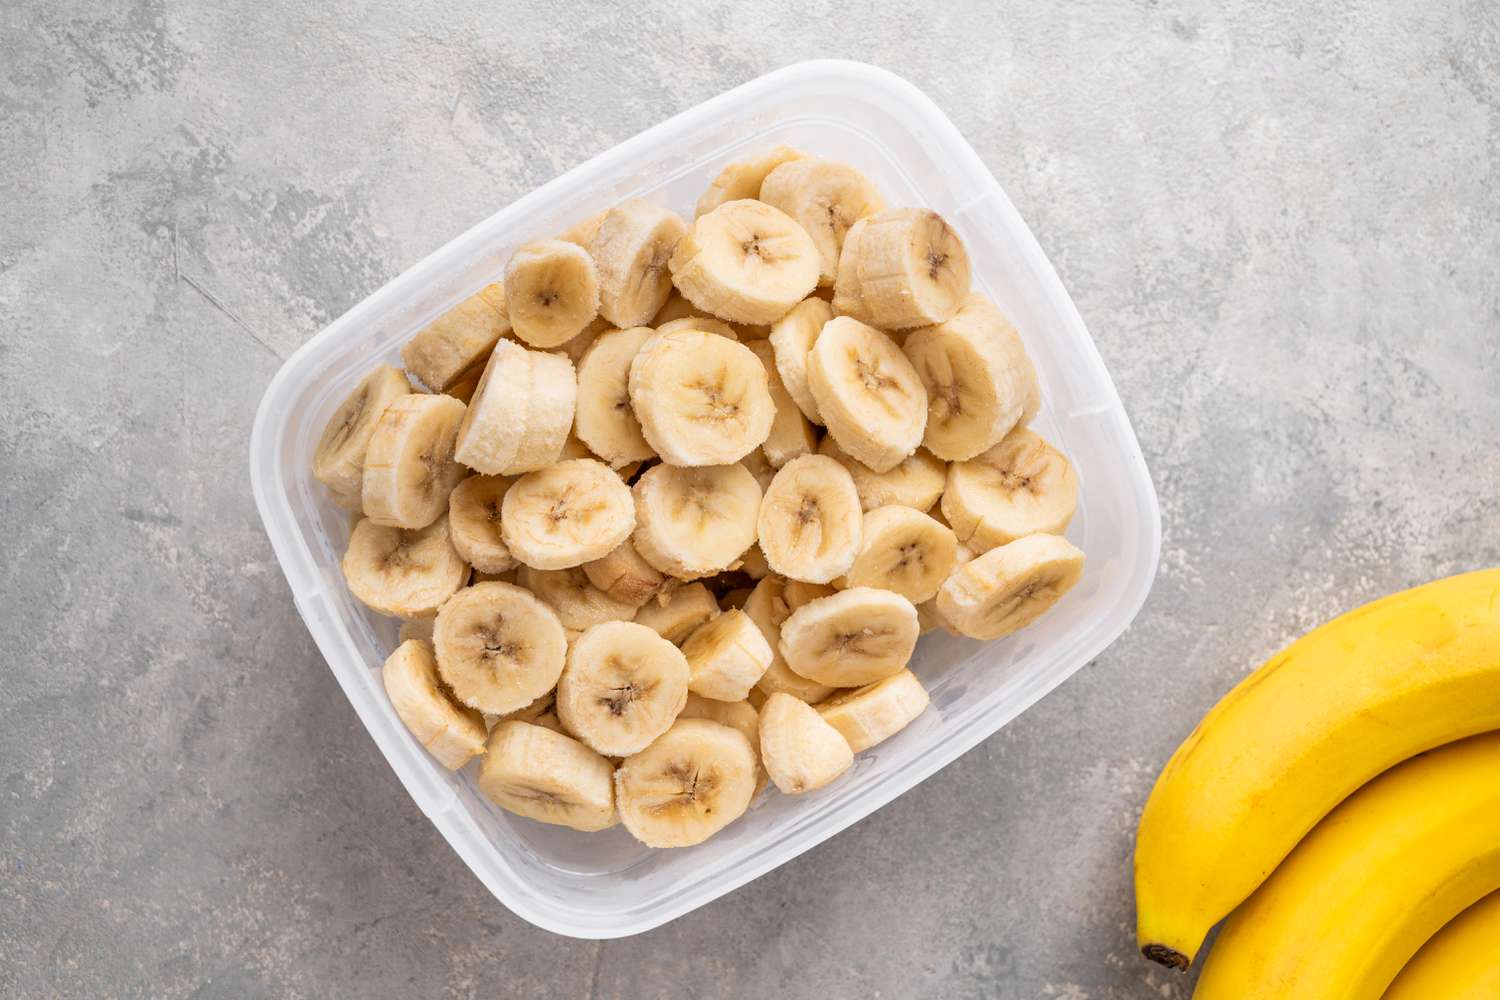 How To Store A Cut Banana